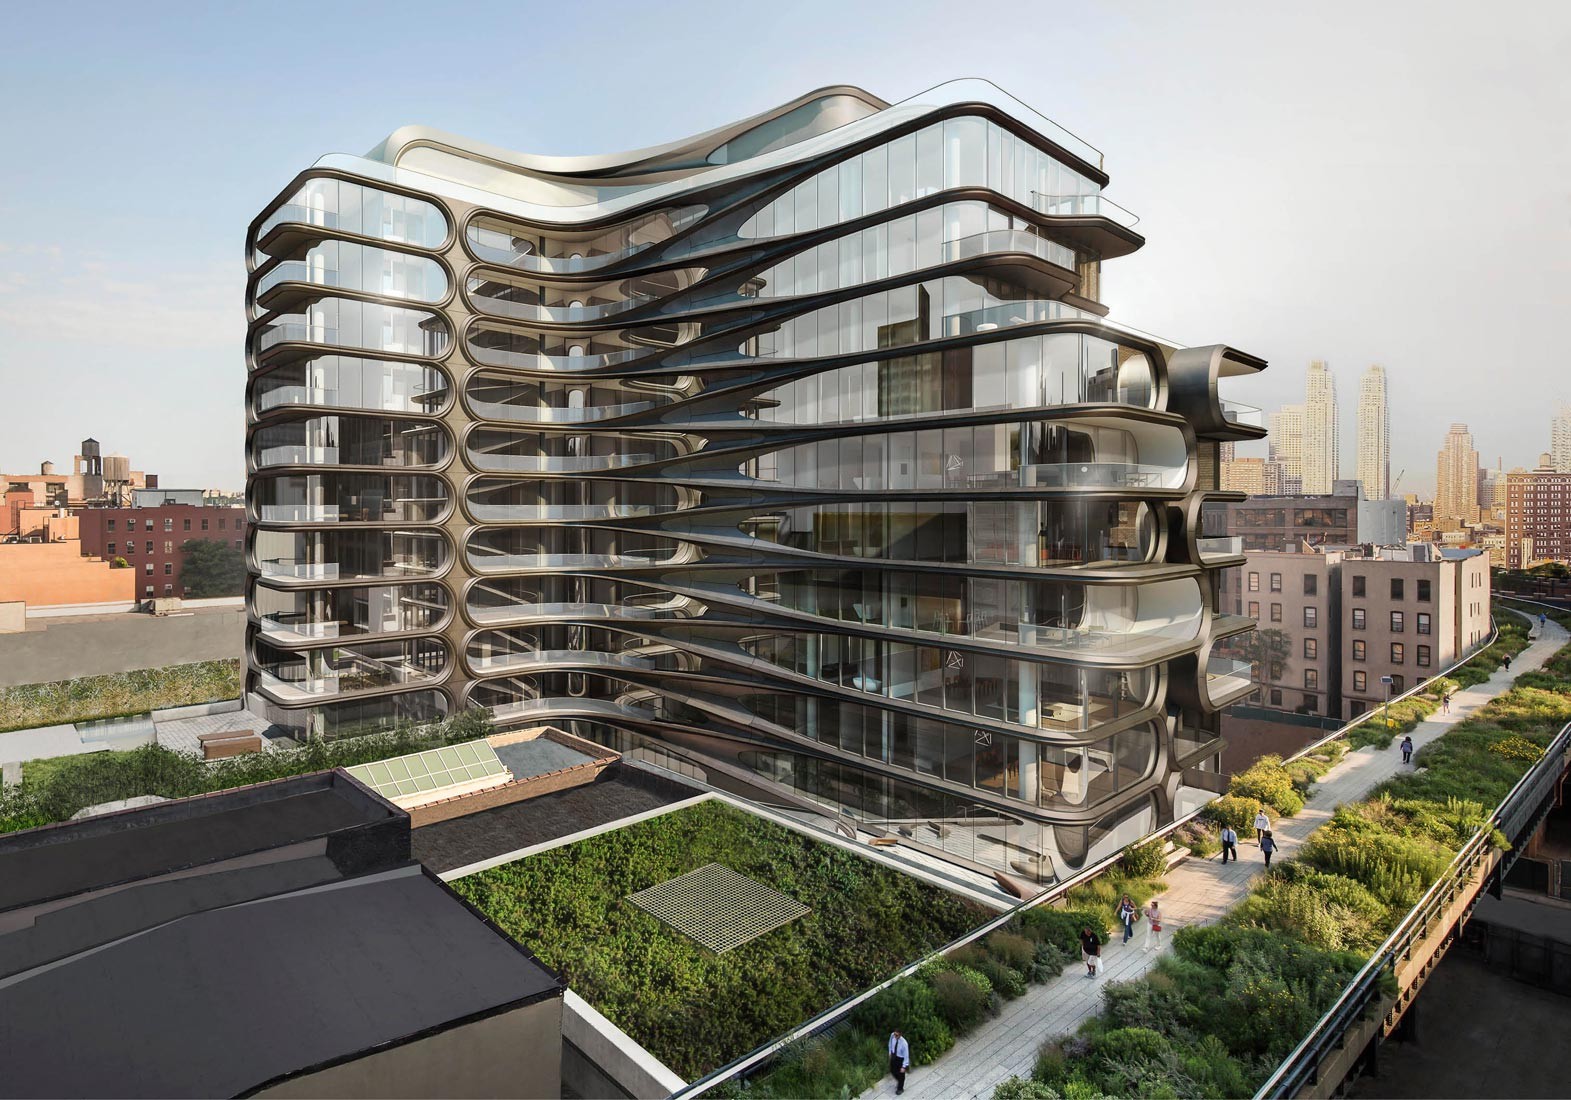 520 west 28th residences in new york